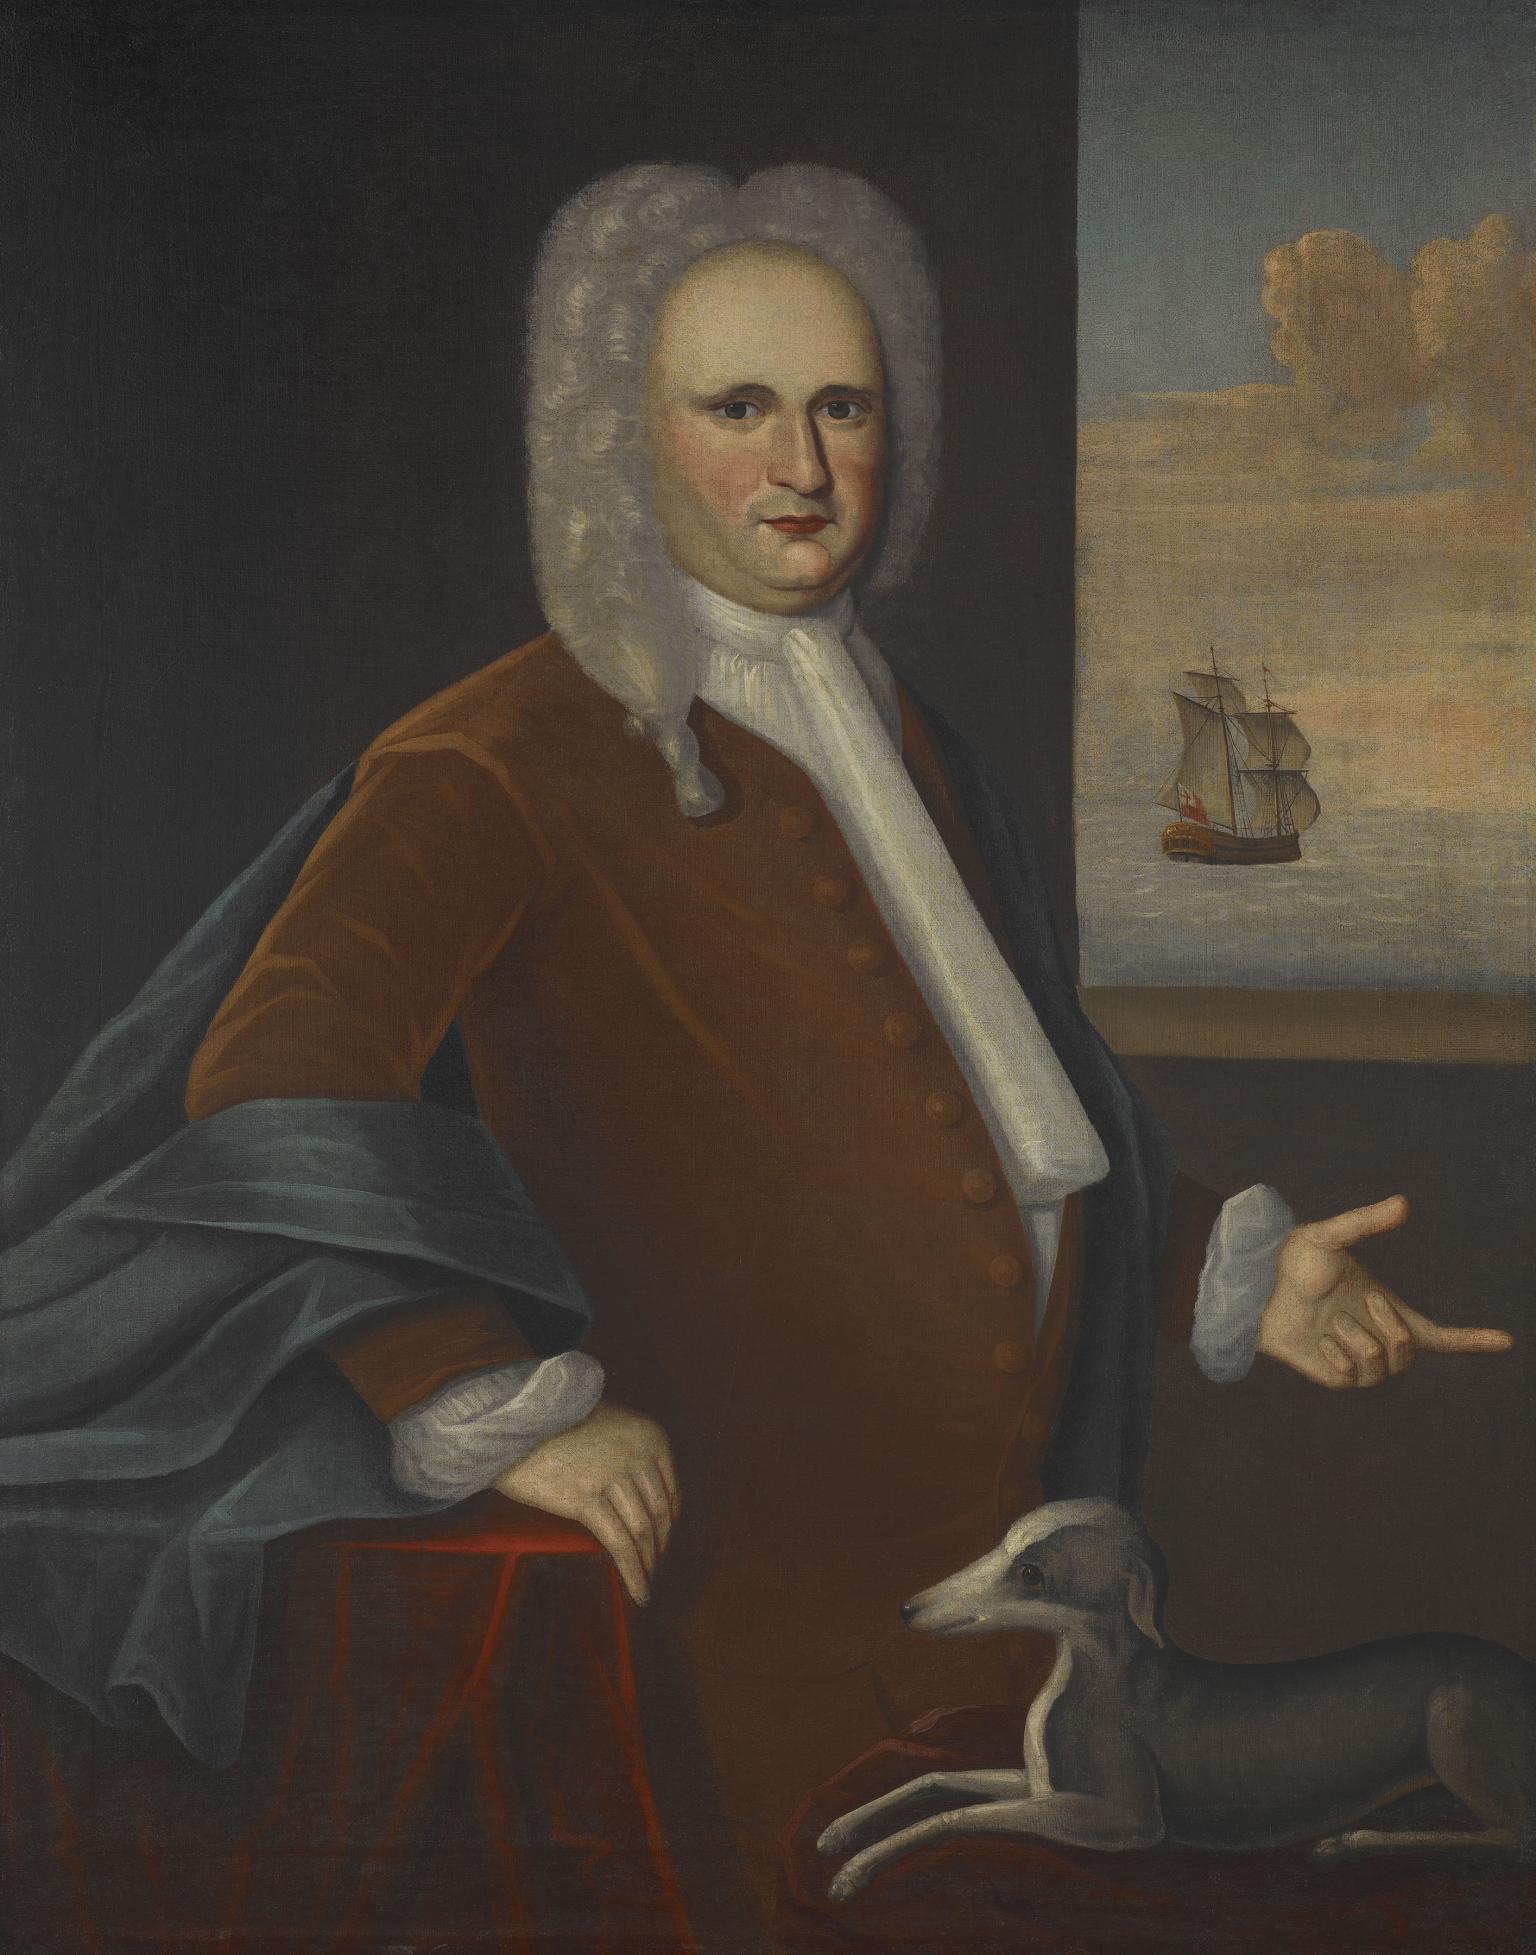 Portrait painting of man with dog in his lap and boat on sea in background. 